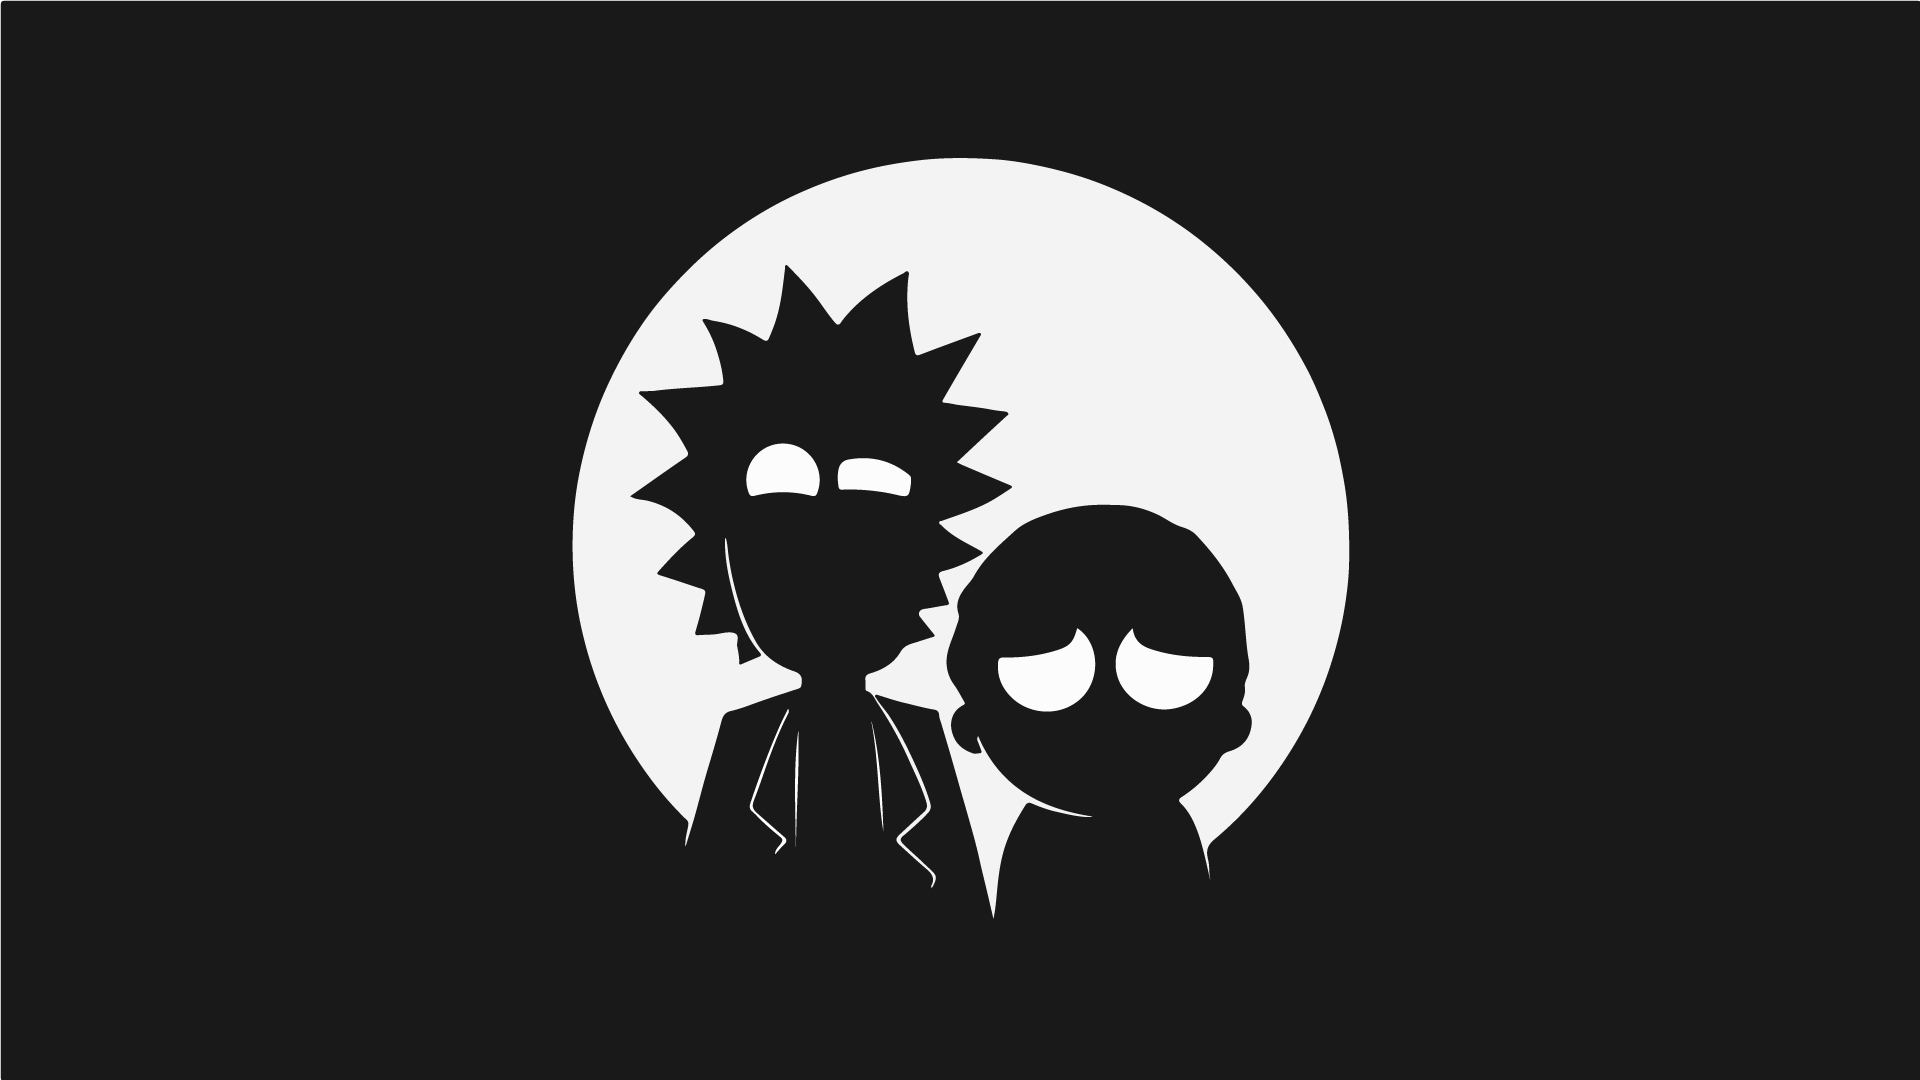 Rick and Morty Wallpapers • Latest Collection • TrumpWallpapers